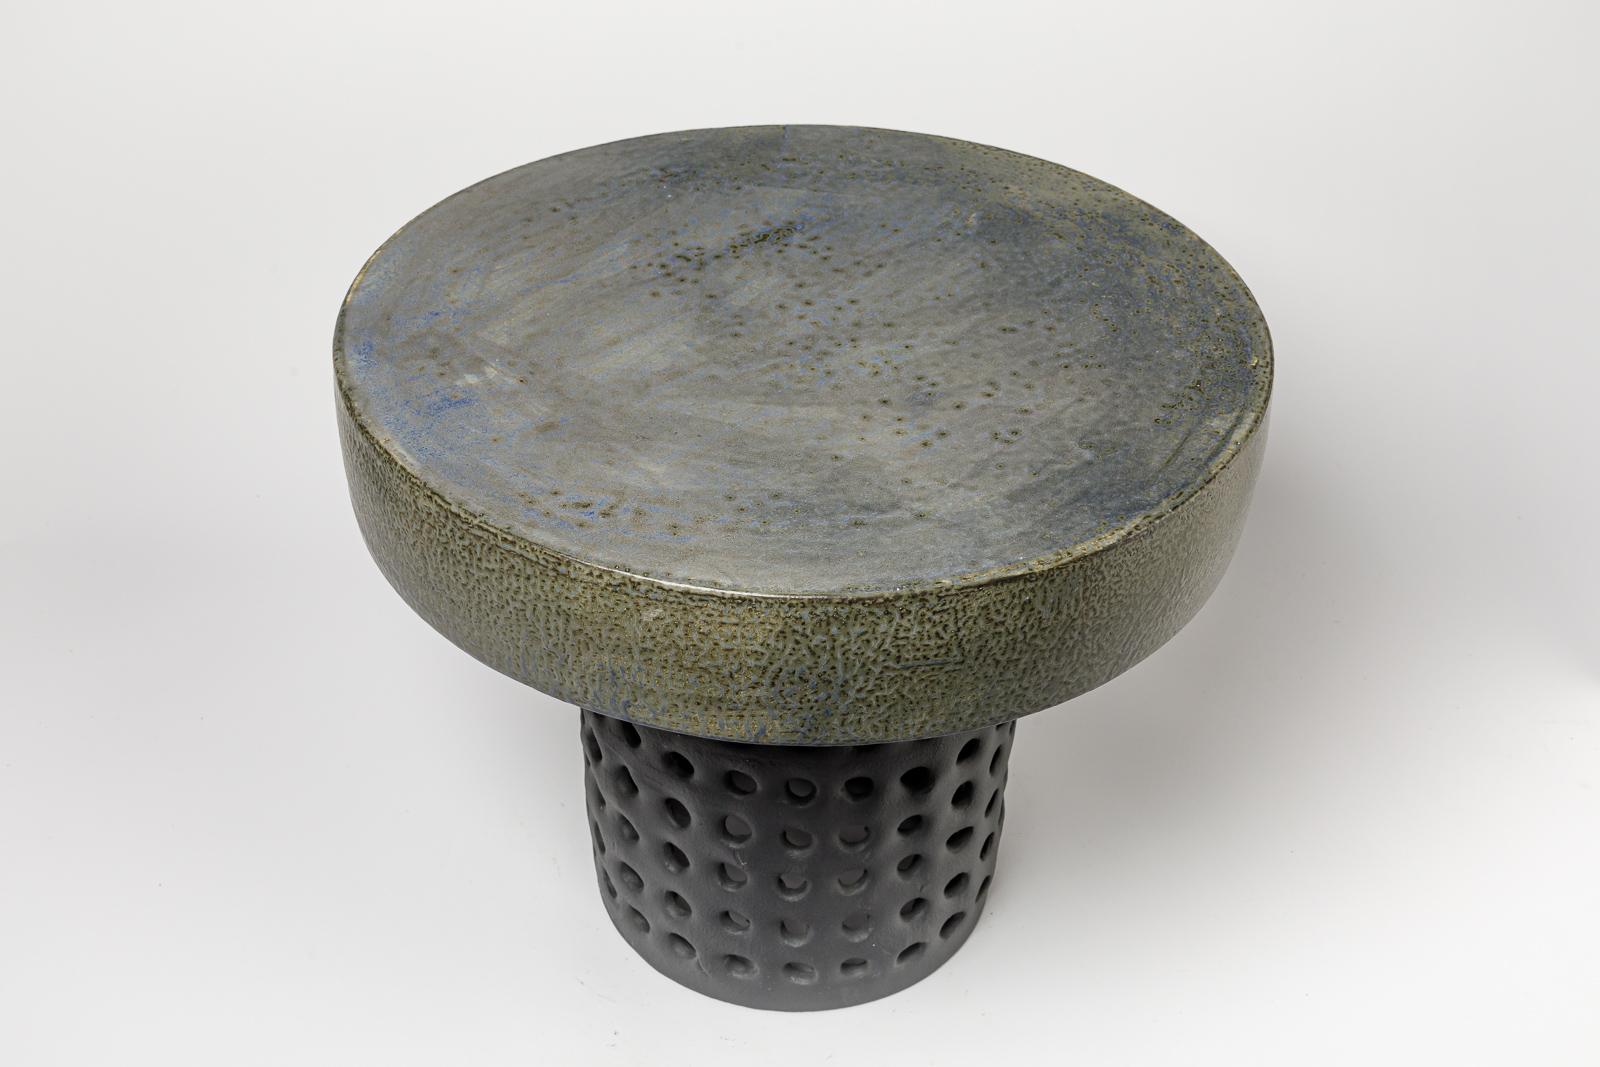 Pair of black/blue and grey/green glazed ceramic stool or coffee table 4